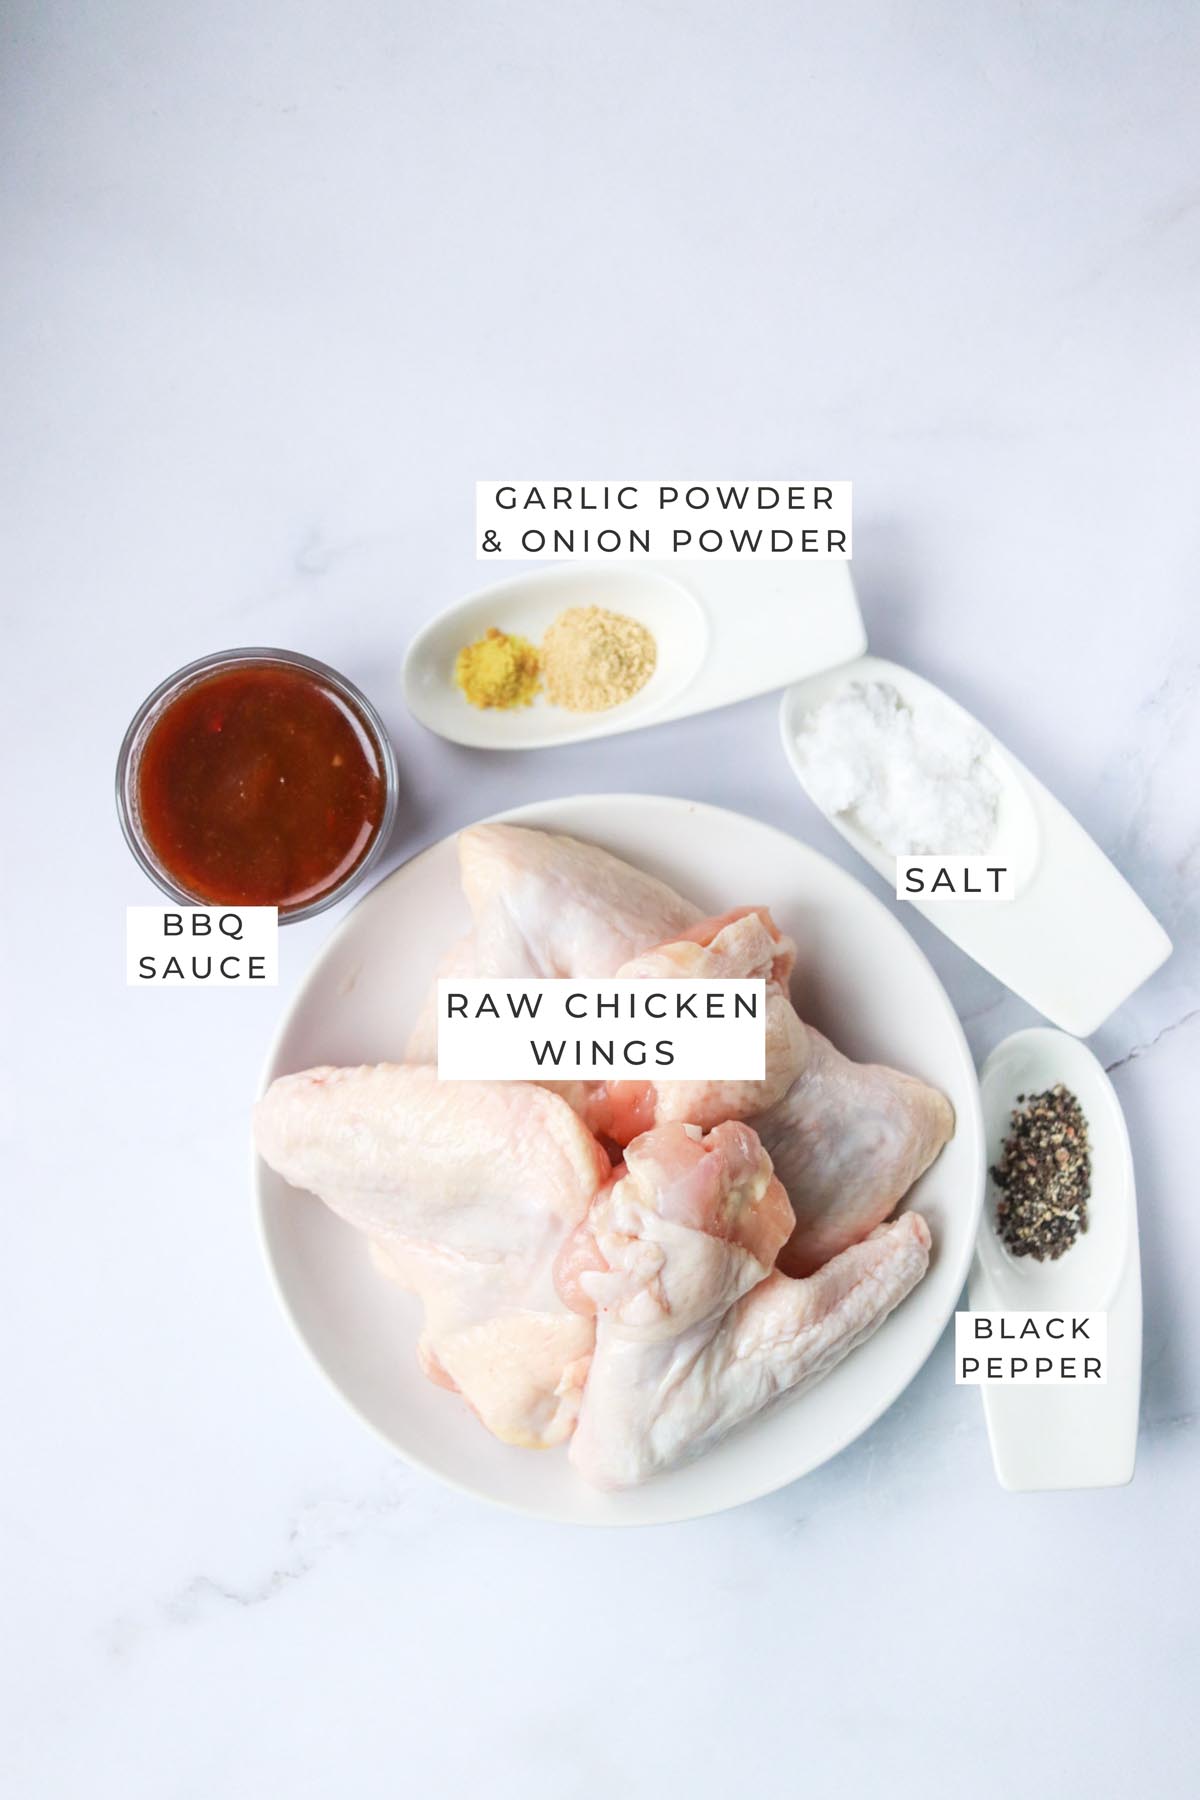 Labeled ingredients for the chicken wings.